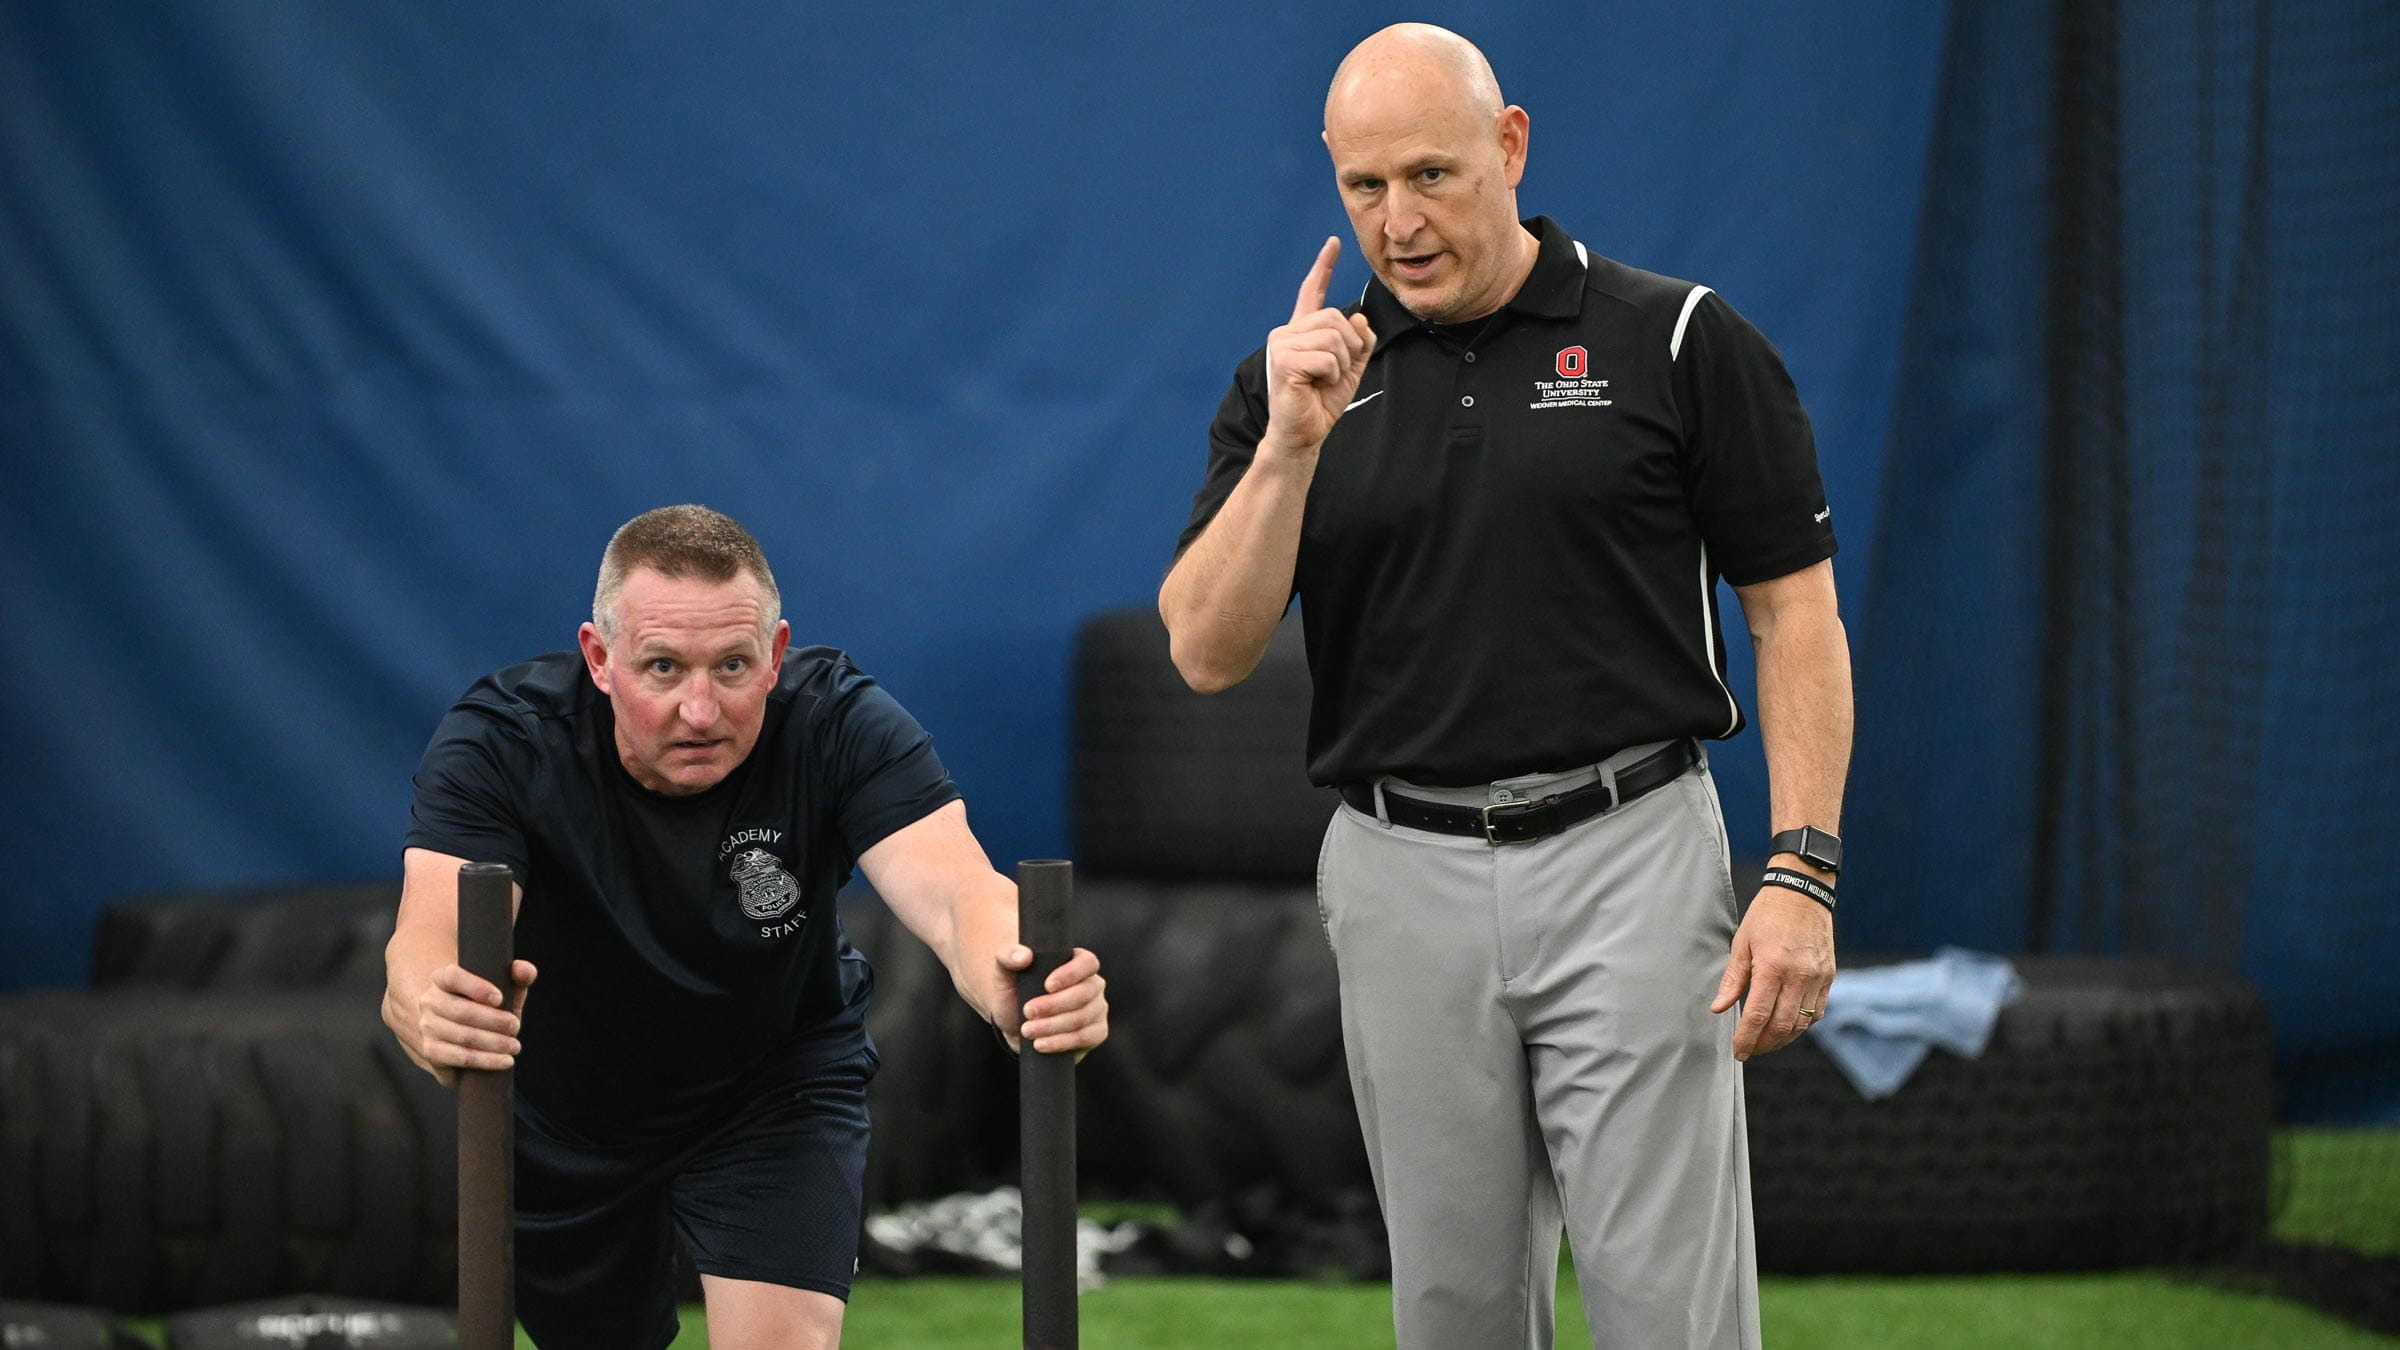 First responders benefit from physical therapy that treats them like elite athletes